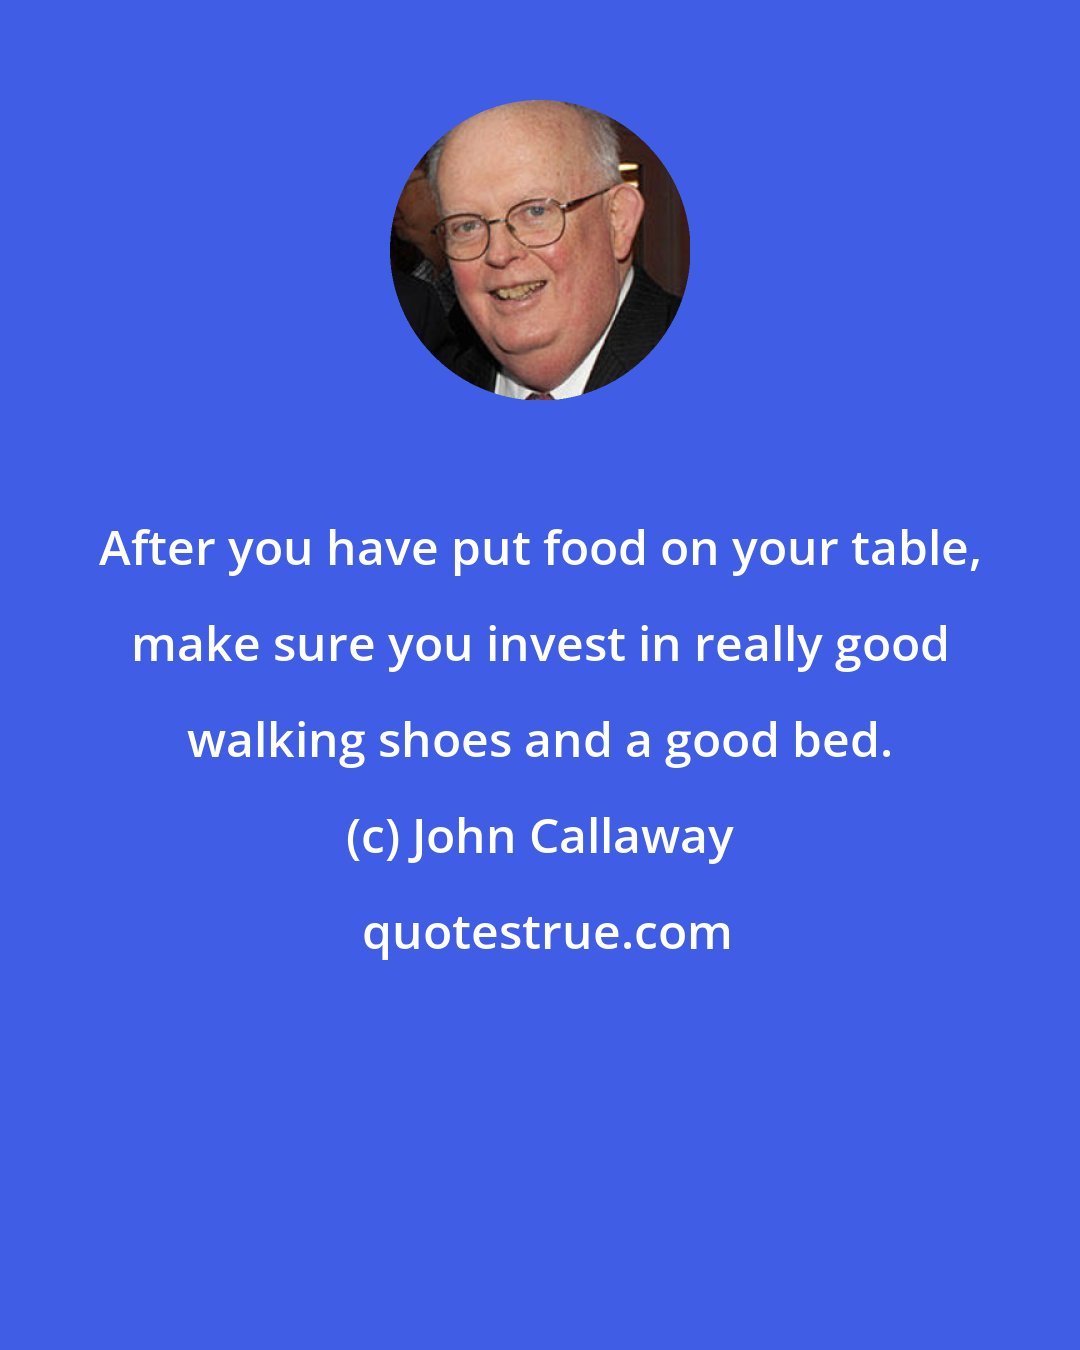 John Callaway: After you have put food on your table, make sure you invest in really good walking shoes and a good bed.